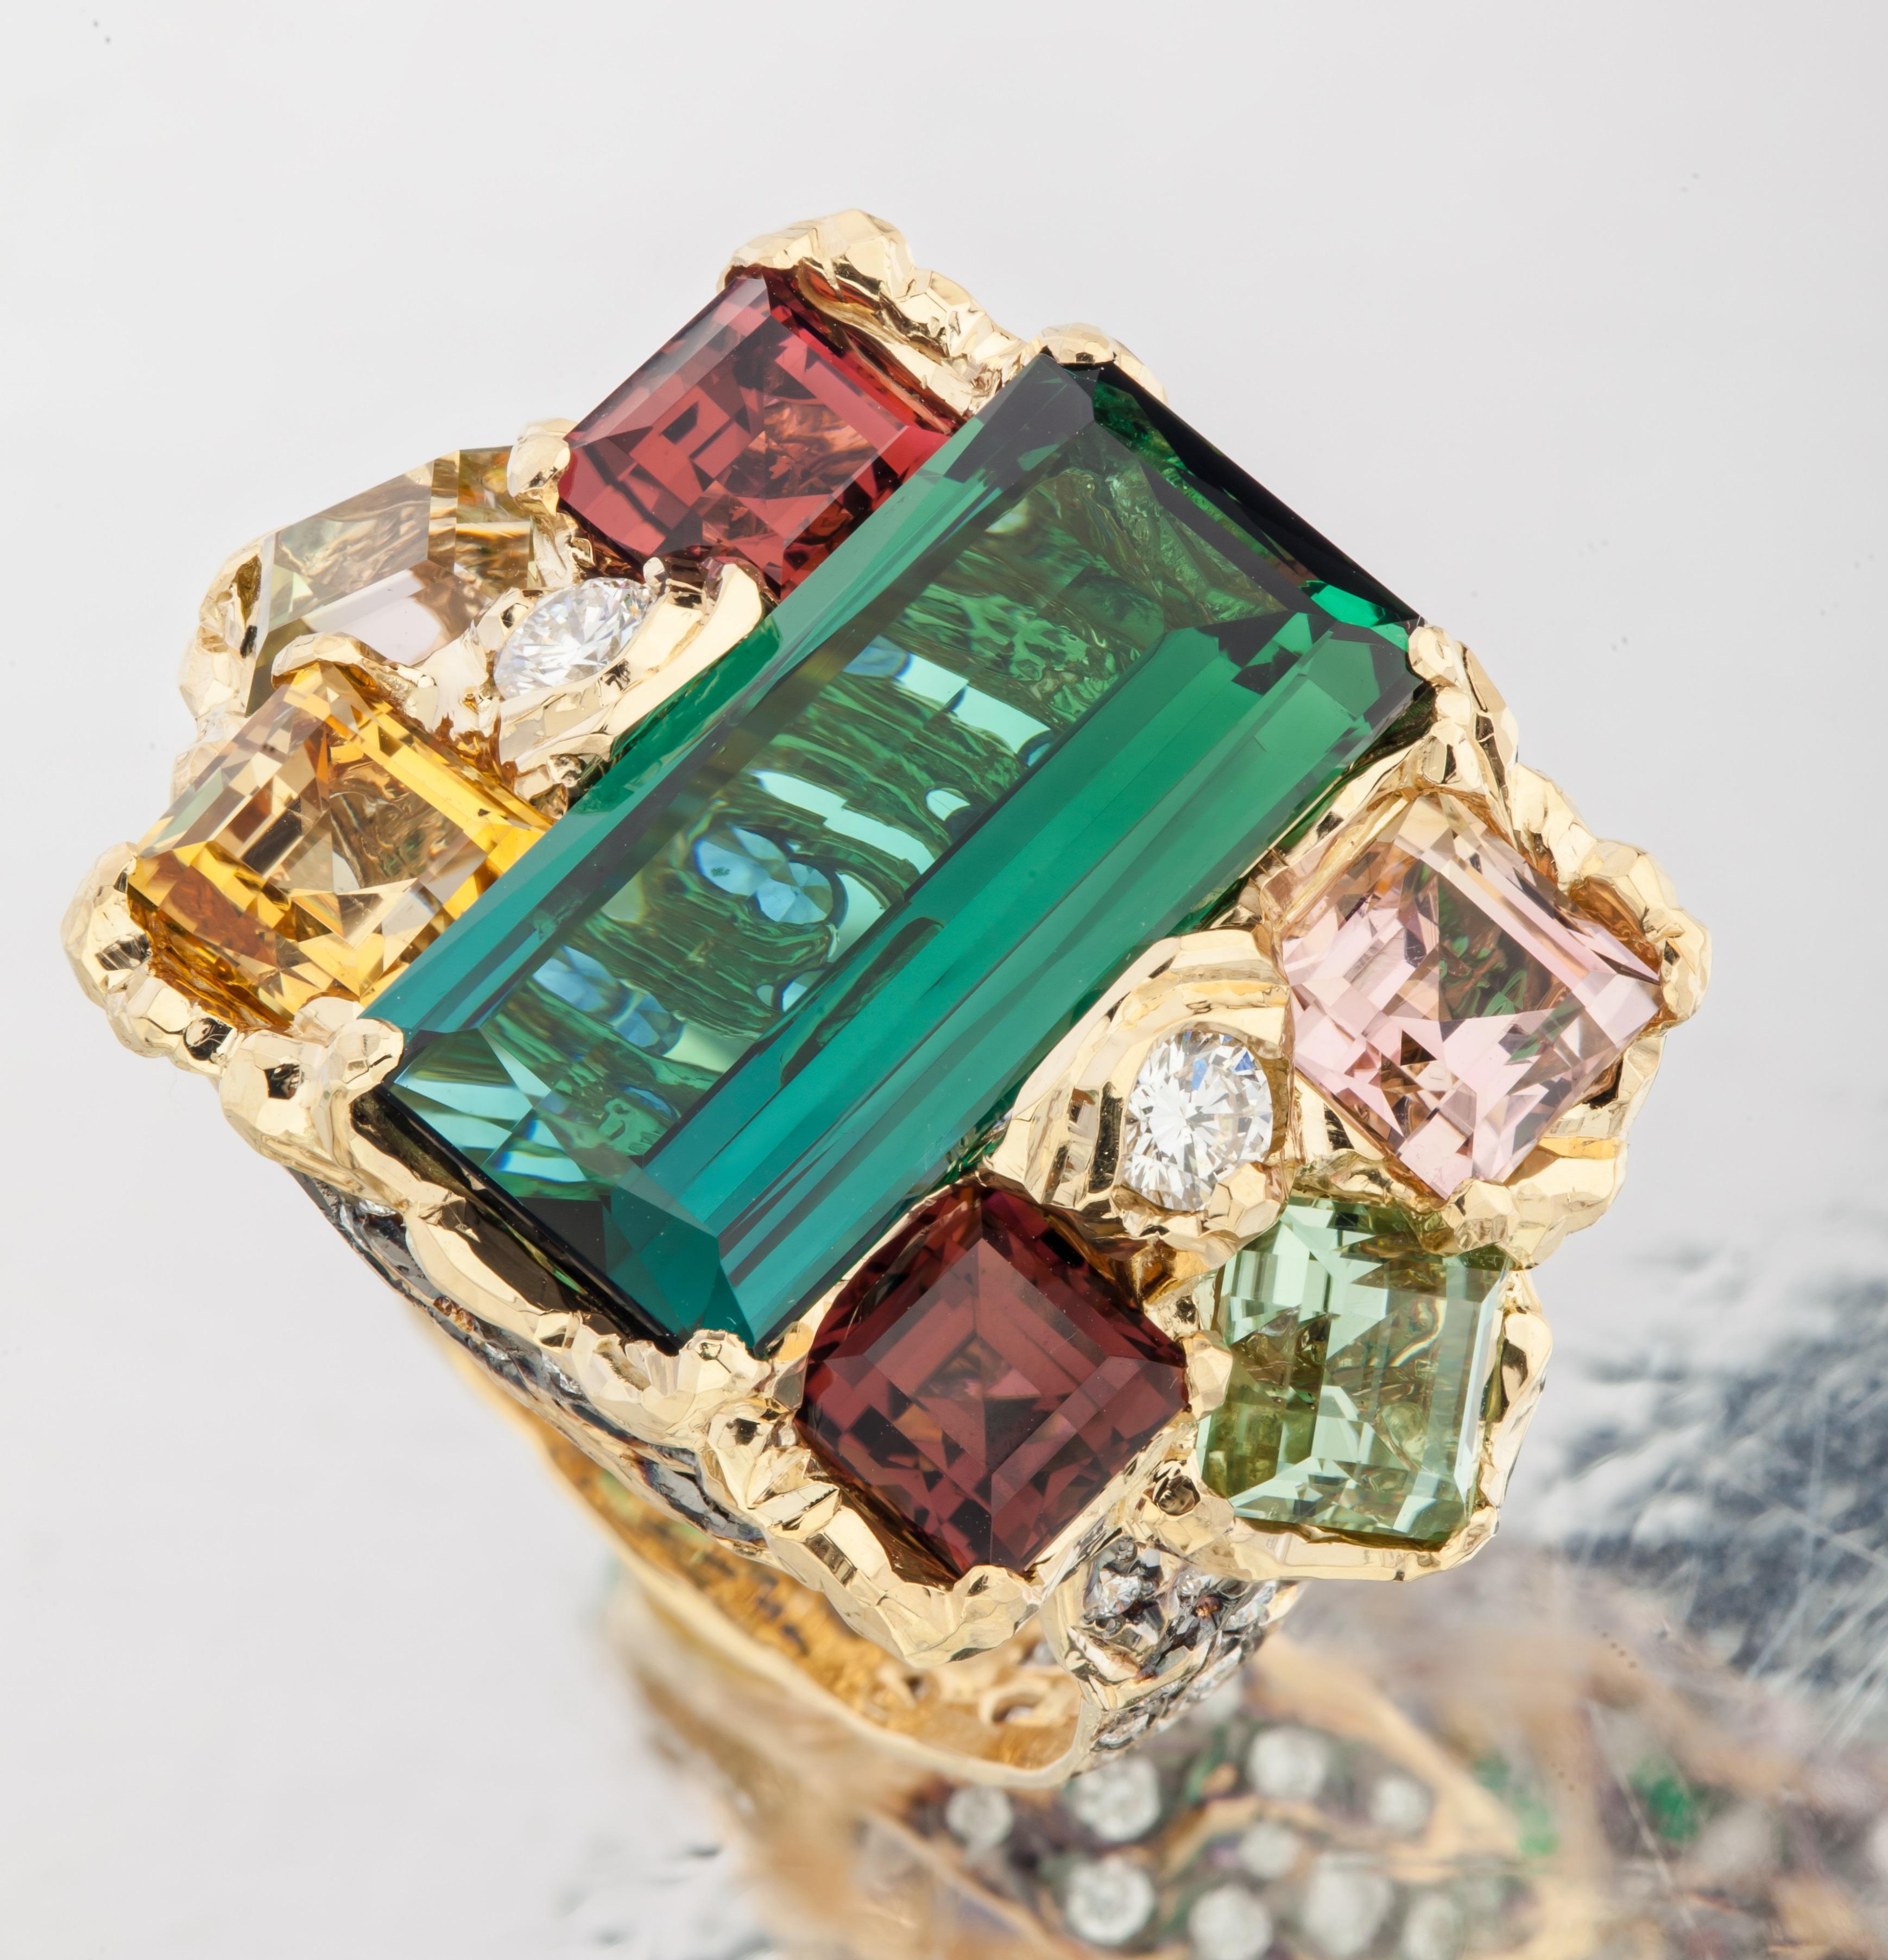 Inspired by Impressionism and starry night painting by Van Gogh, MOISEIKIN has created a starry night motif handmade ring lavished with multi colourful gems. Let's find your best star in the spangled stars on the ring.  Central green tourmaline is